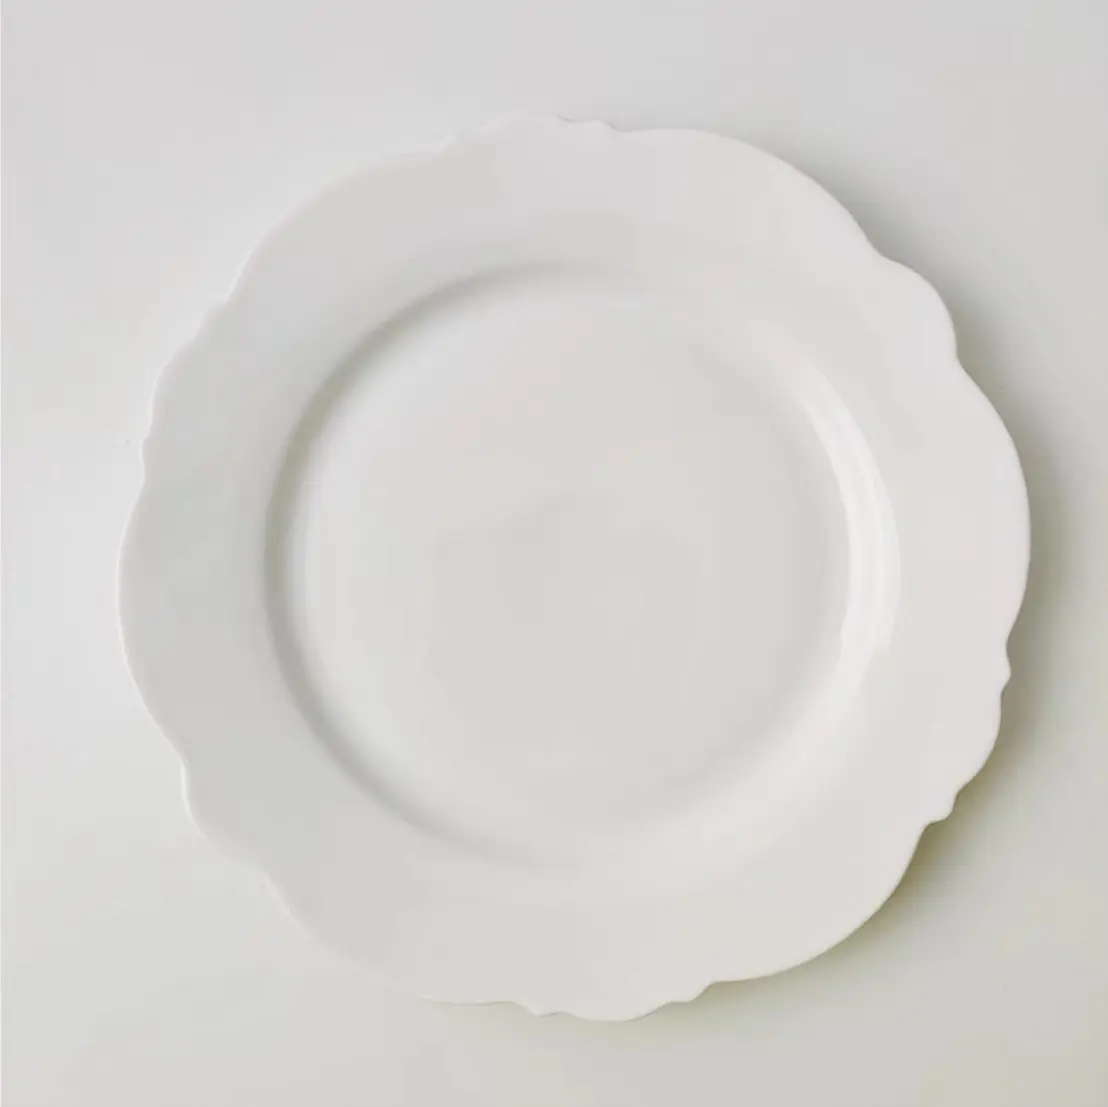 Besta DDP shipping cheap white dining room bone china steak plate for Party